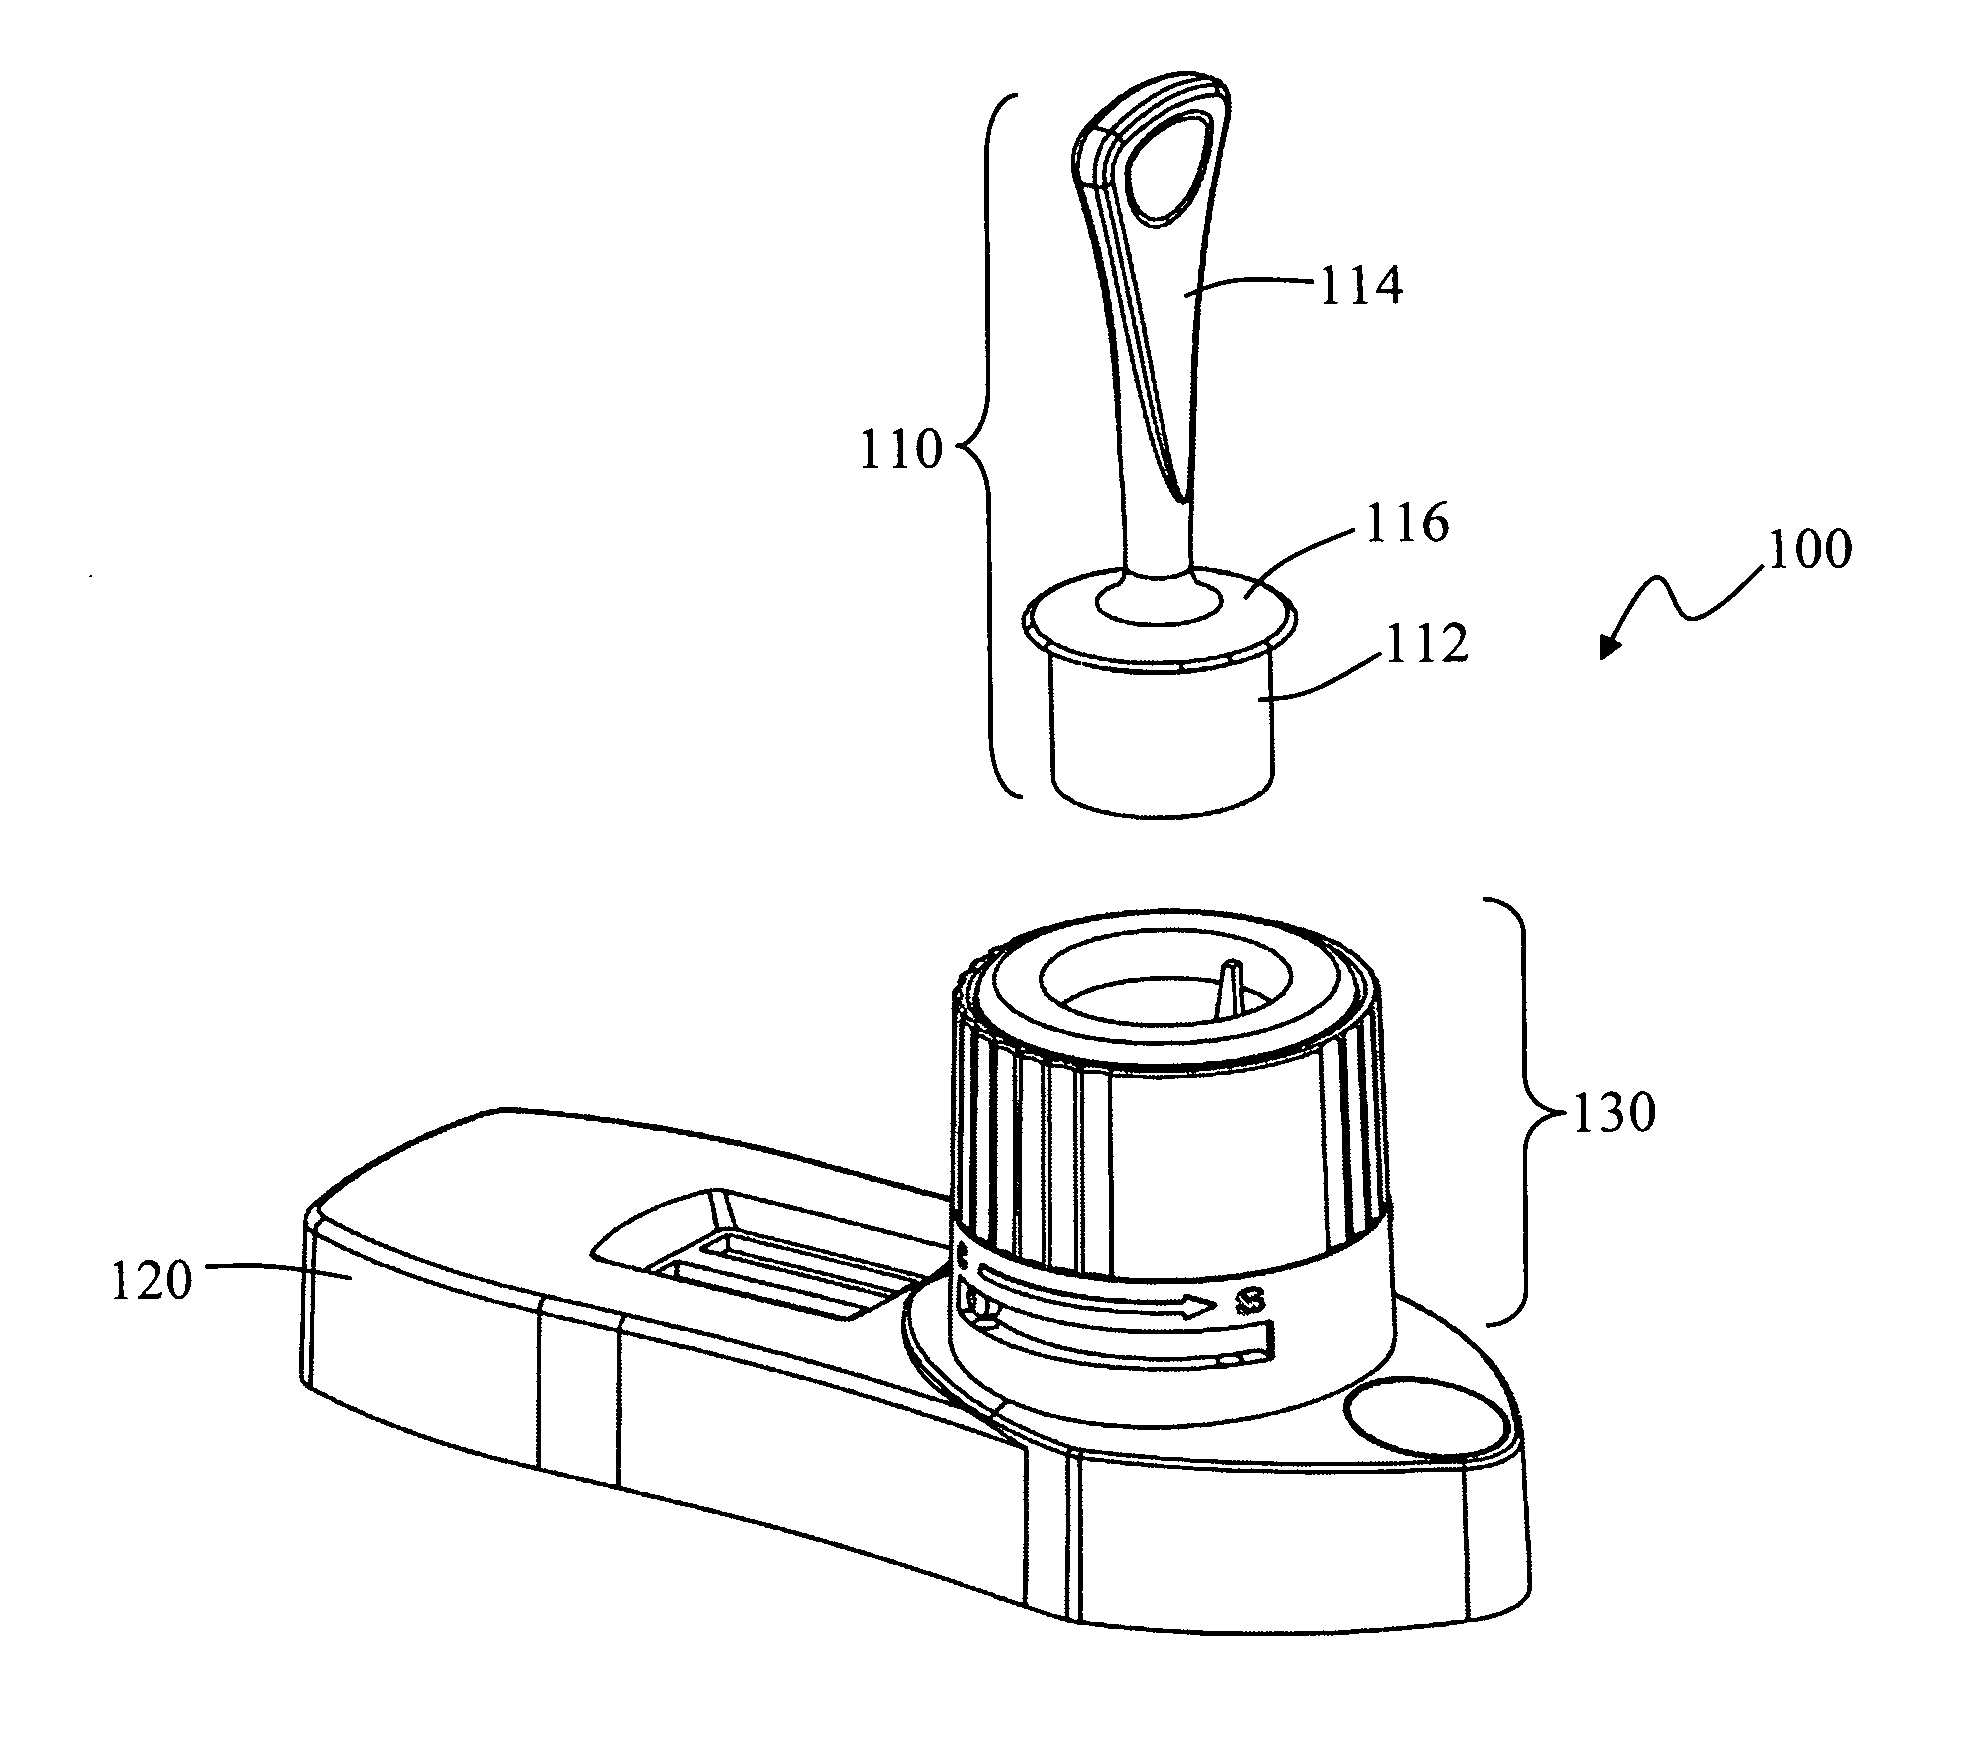 Rapid sample analysis and storage devices and methods of use